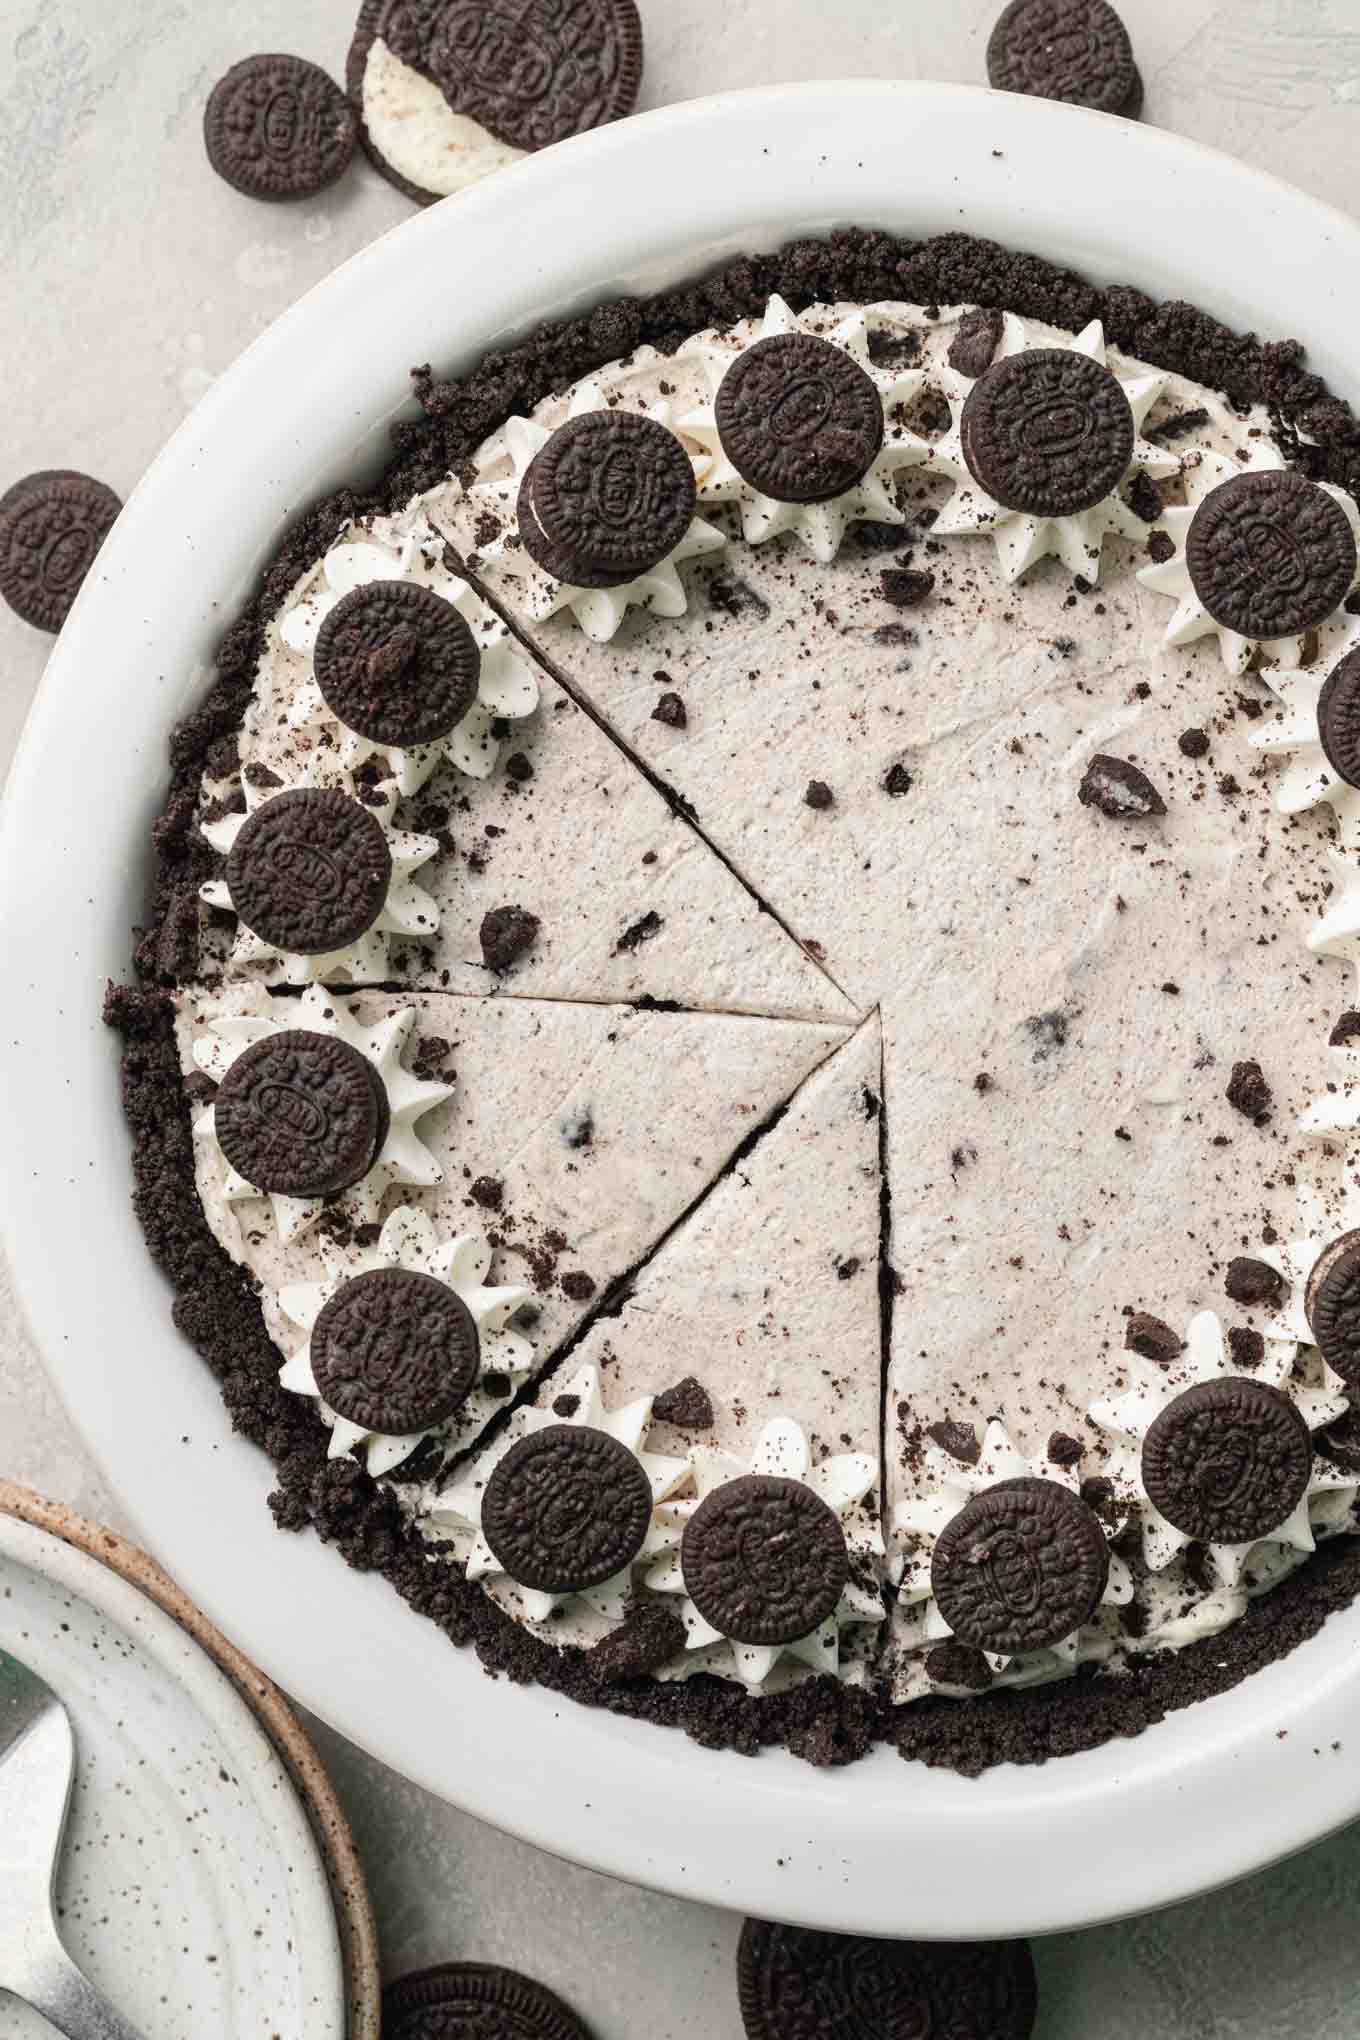 An overhead view of a sliced Oreo pie.